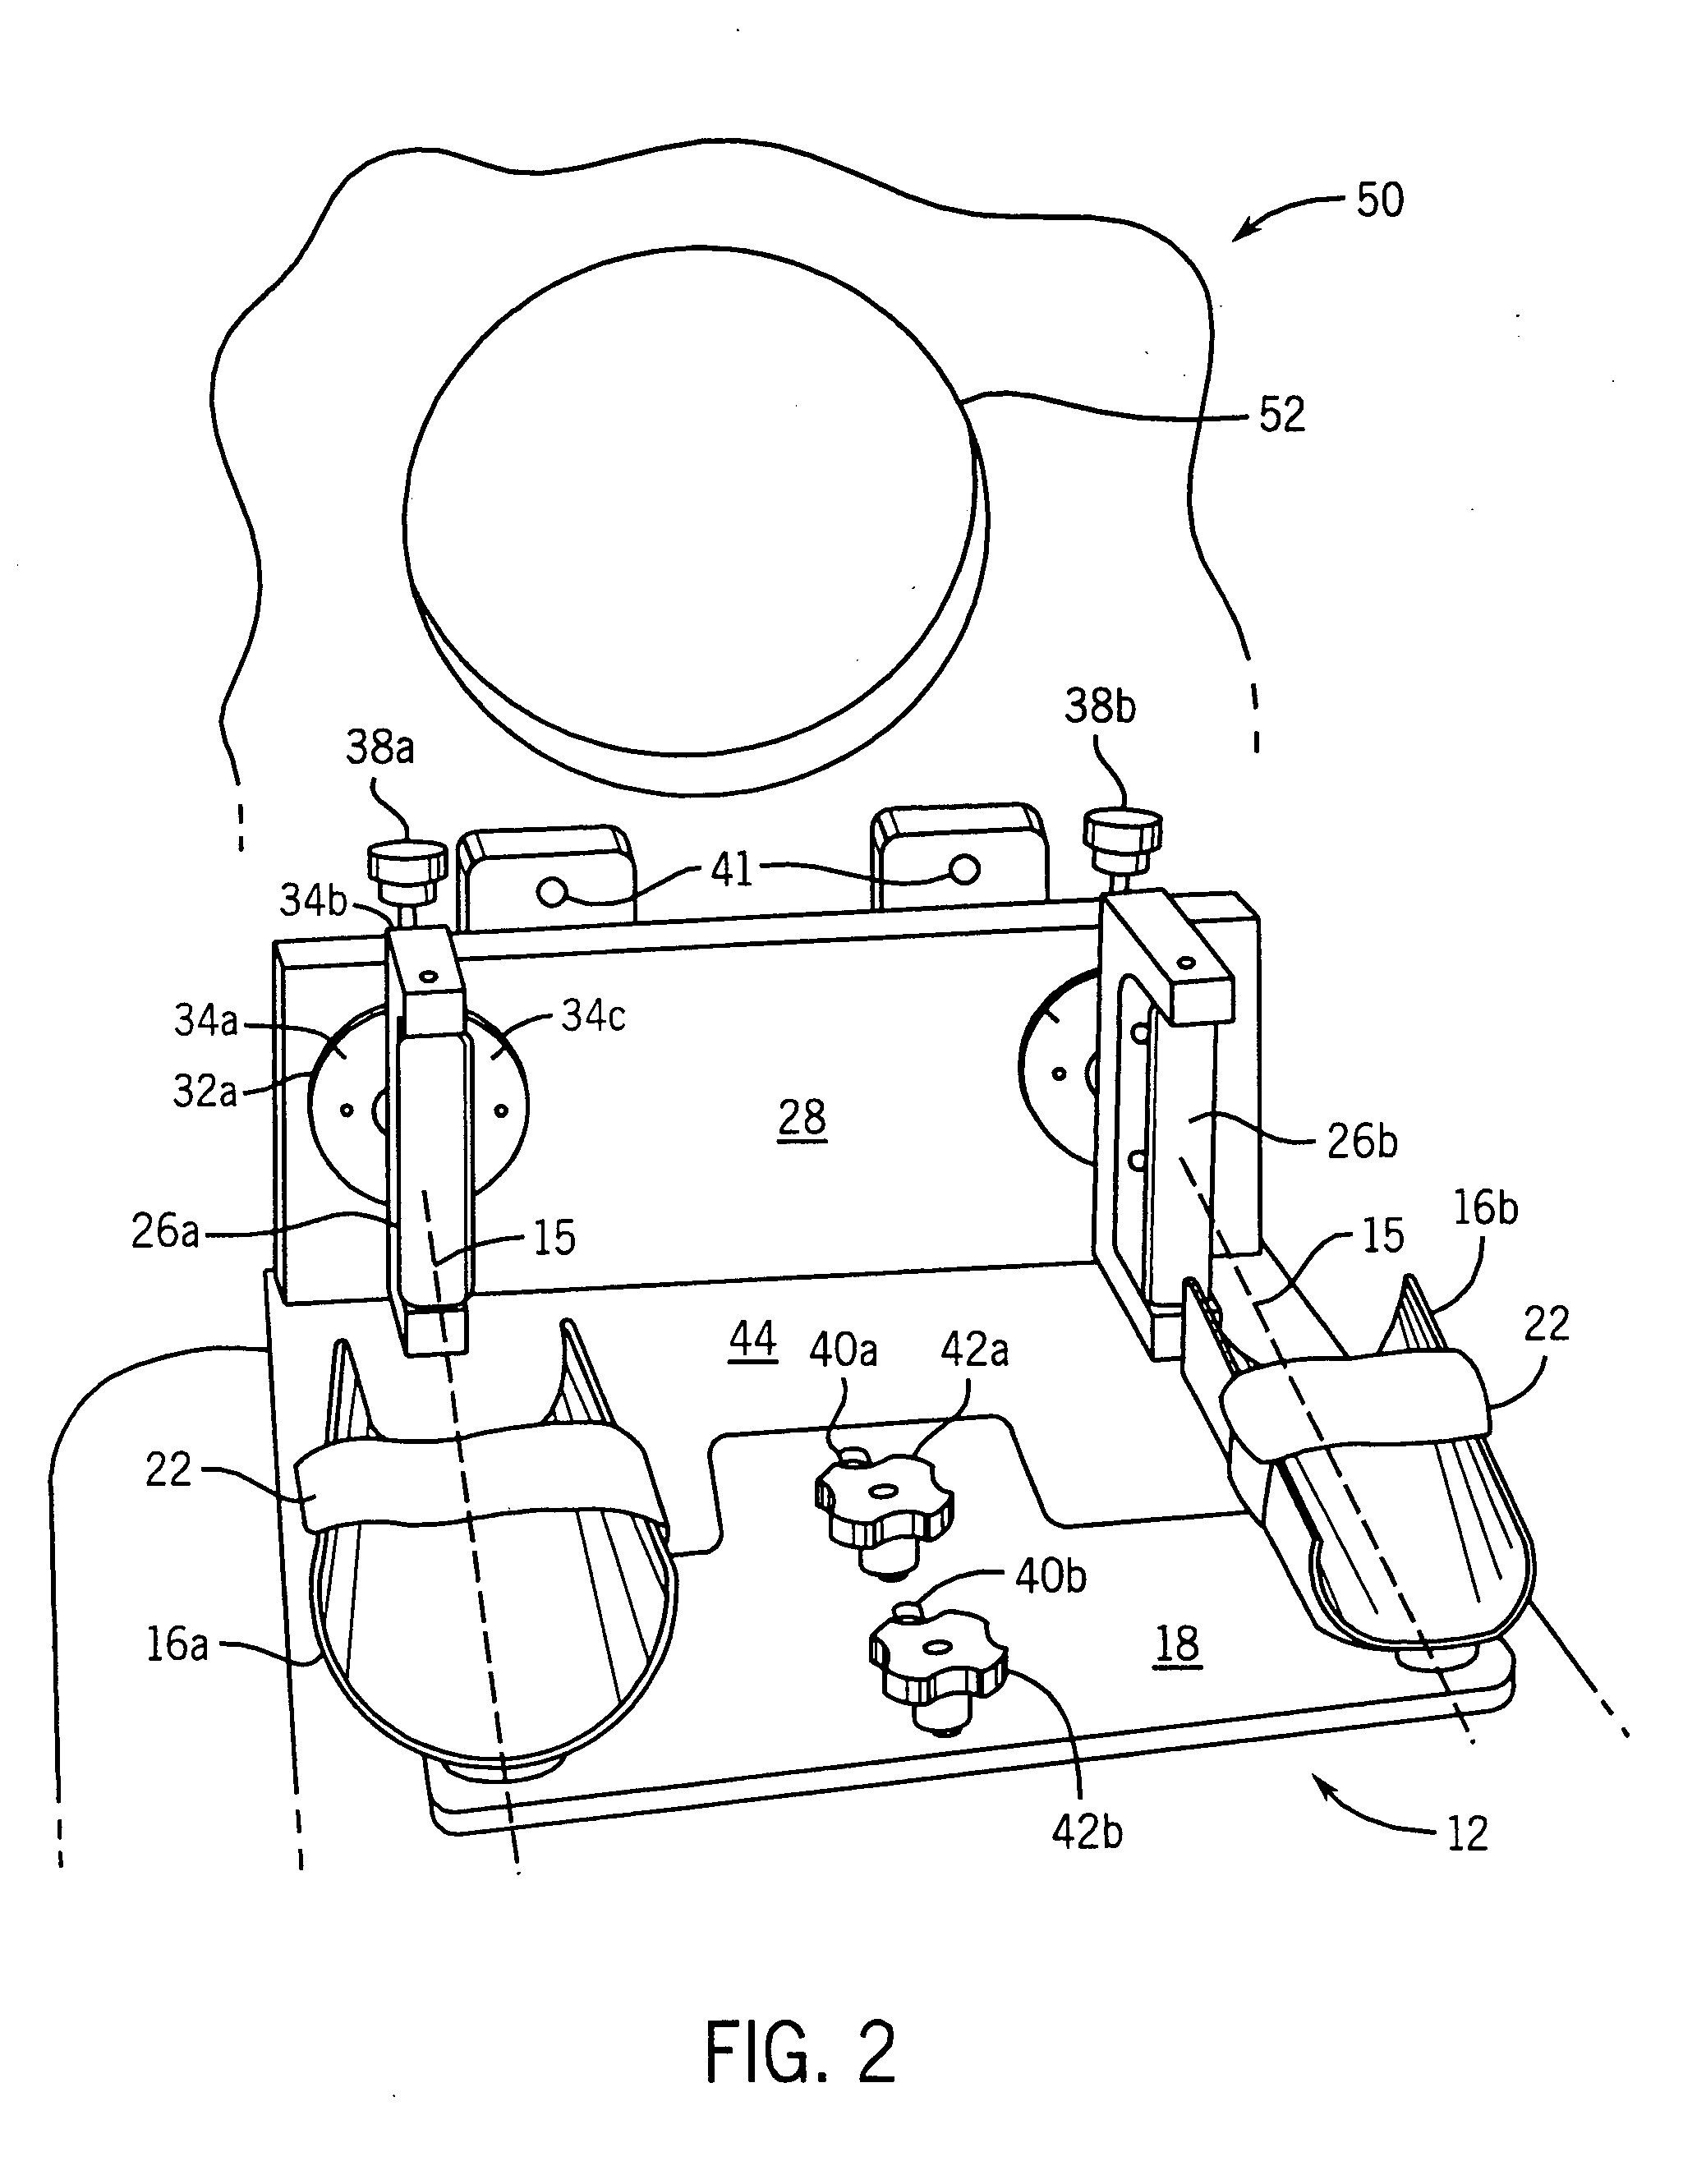 Method and apparatus for positioning a forearm for imaging and analysis